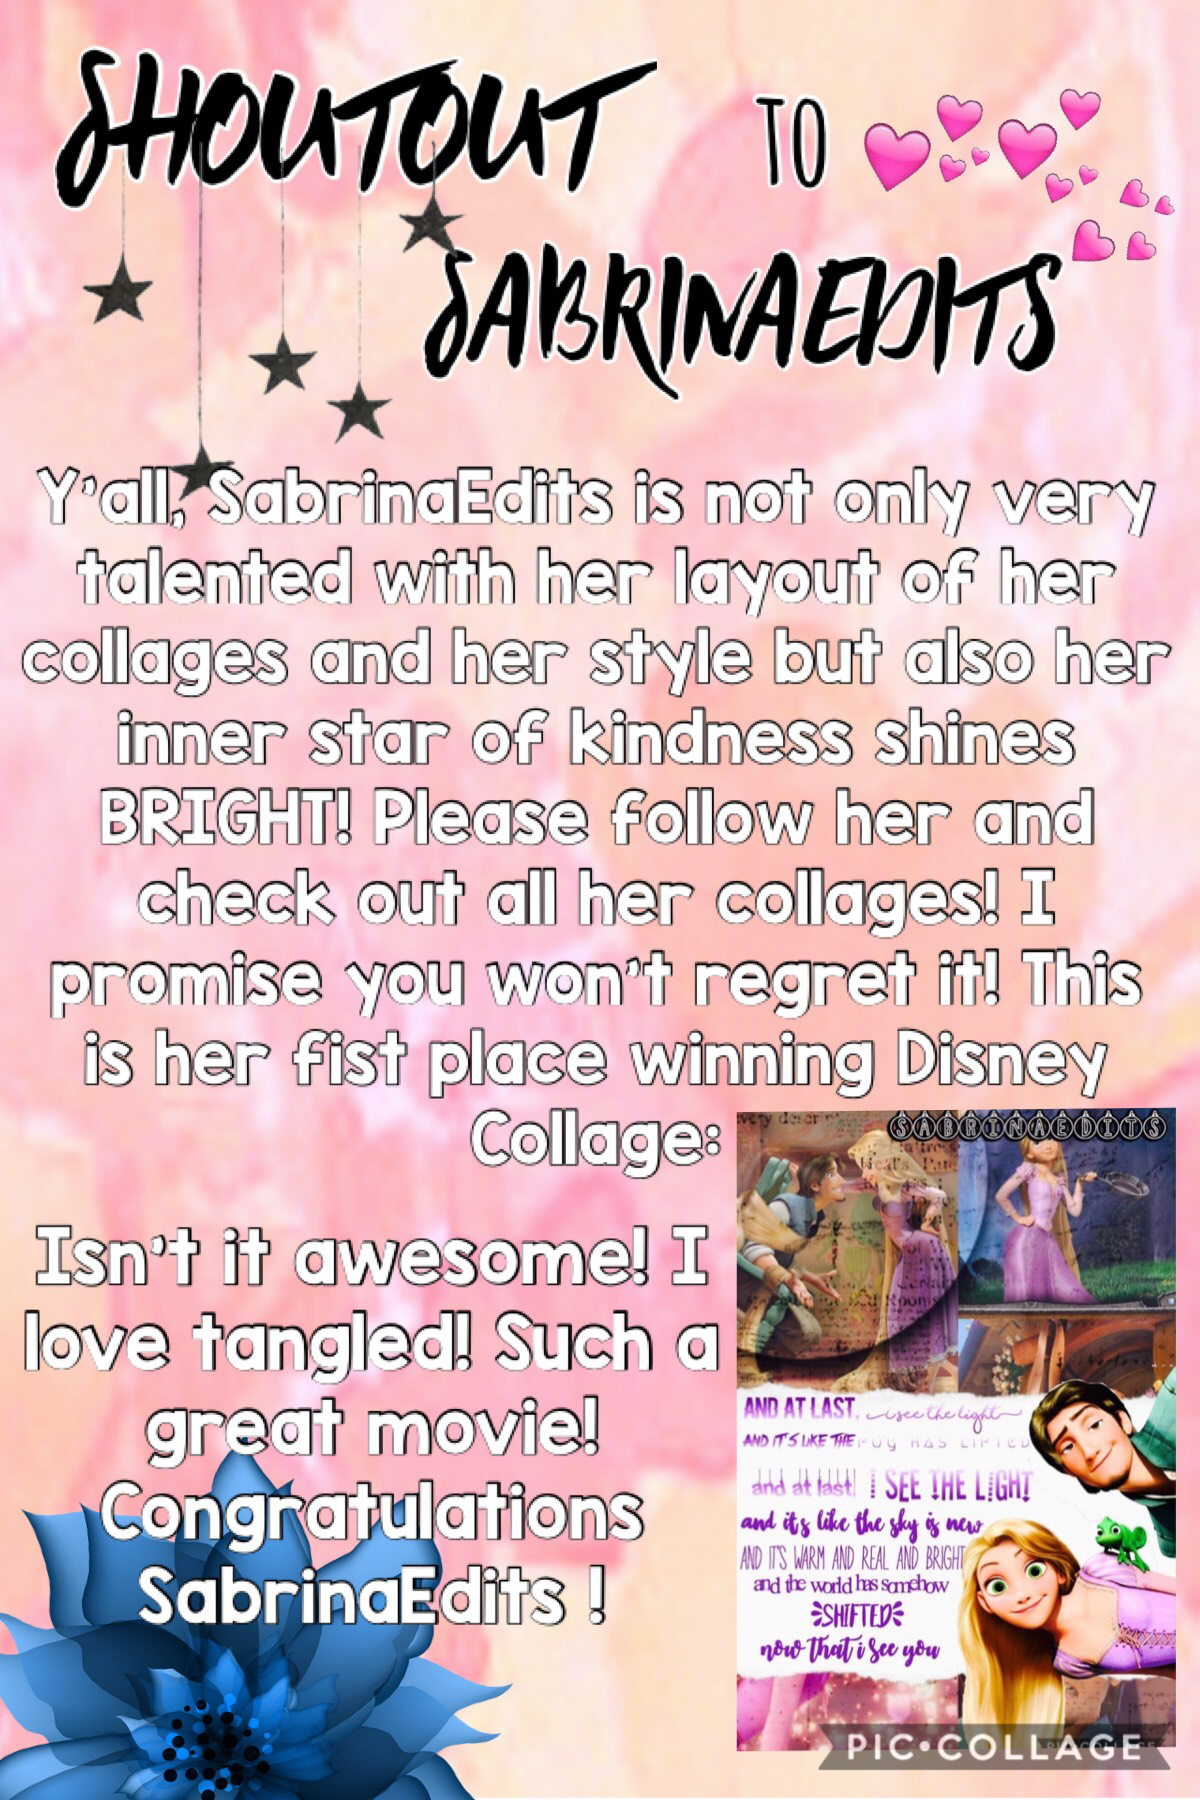 🎉Shoutout to SabrinaEdits !! She won first place in my Disney contest! Please check out her account!! Follow her if you haven’t already!! She’s so nice and sweet!😊💕😎